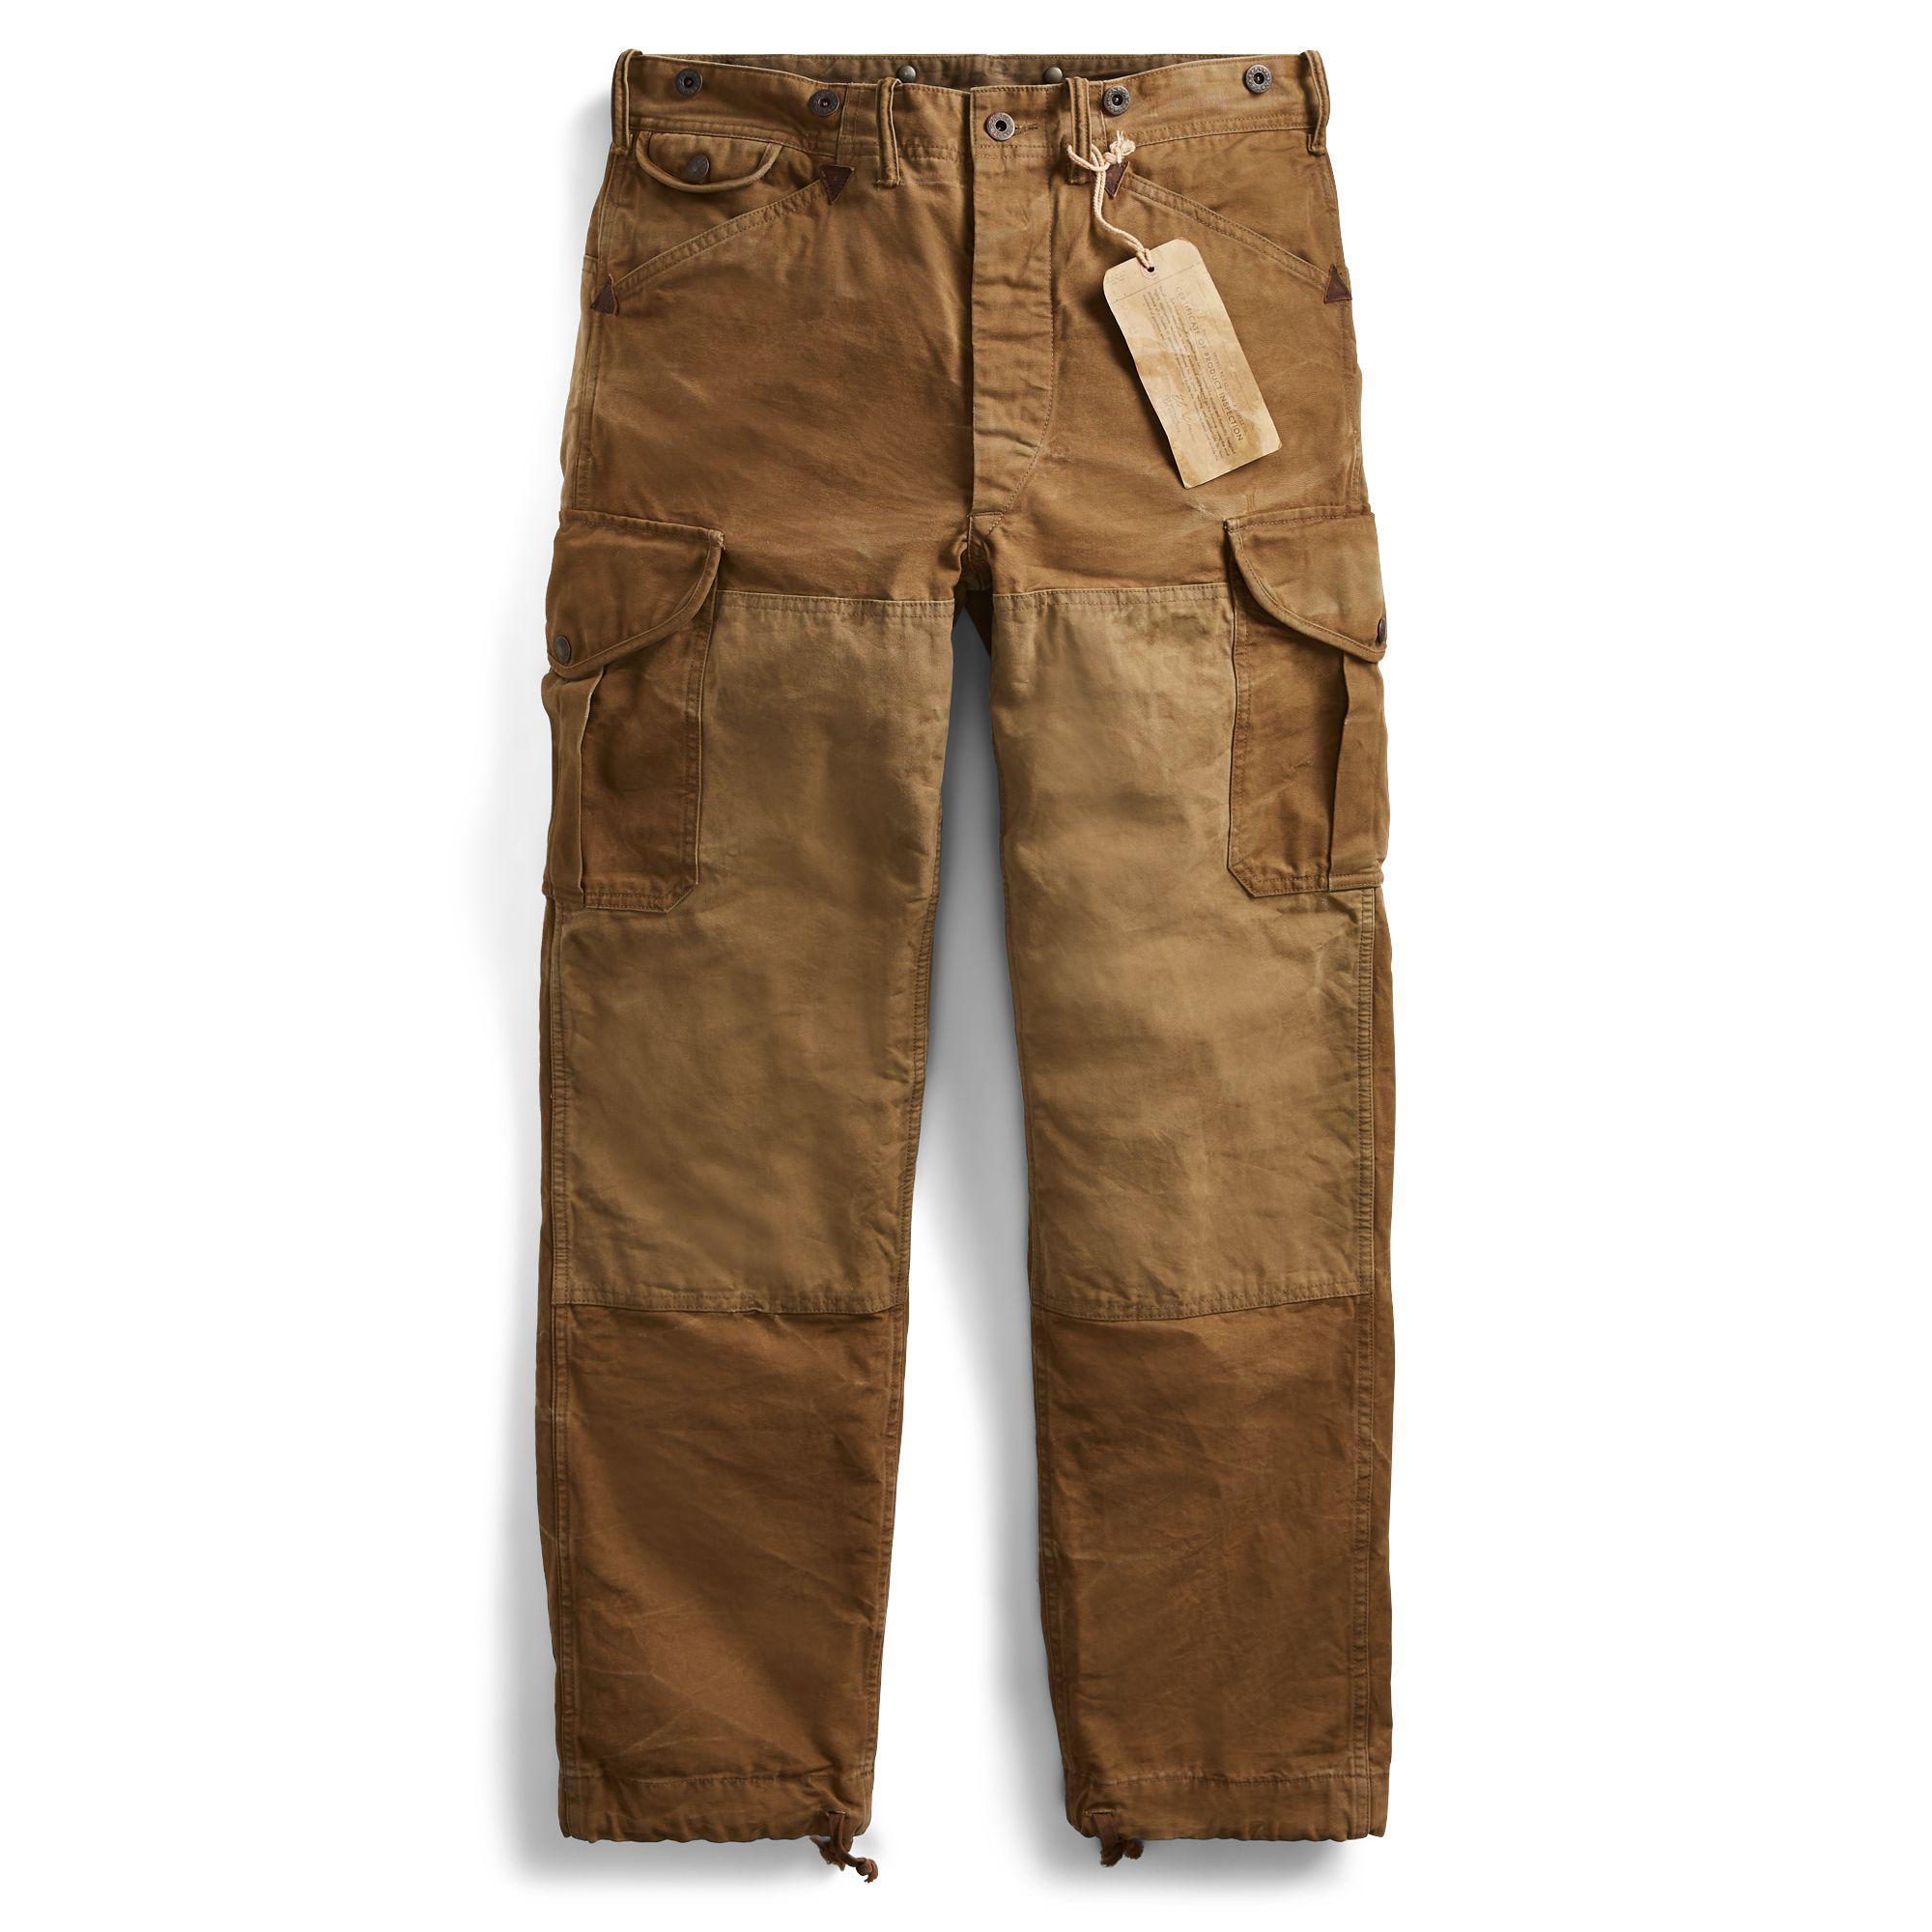 Lyst - Rrl Cotton Canvas Cargo Trouser in Brown for Men